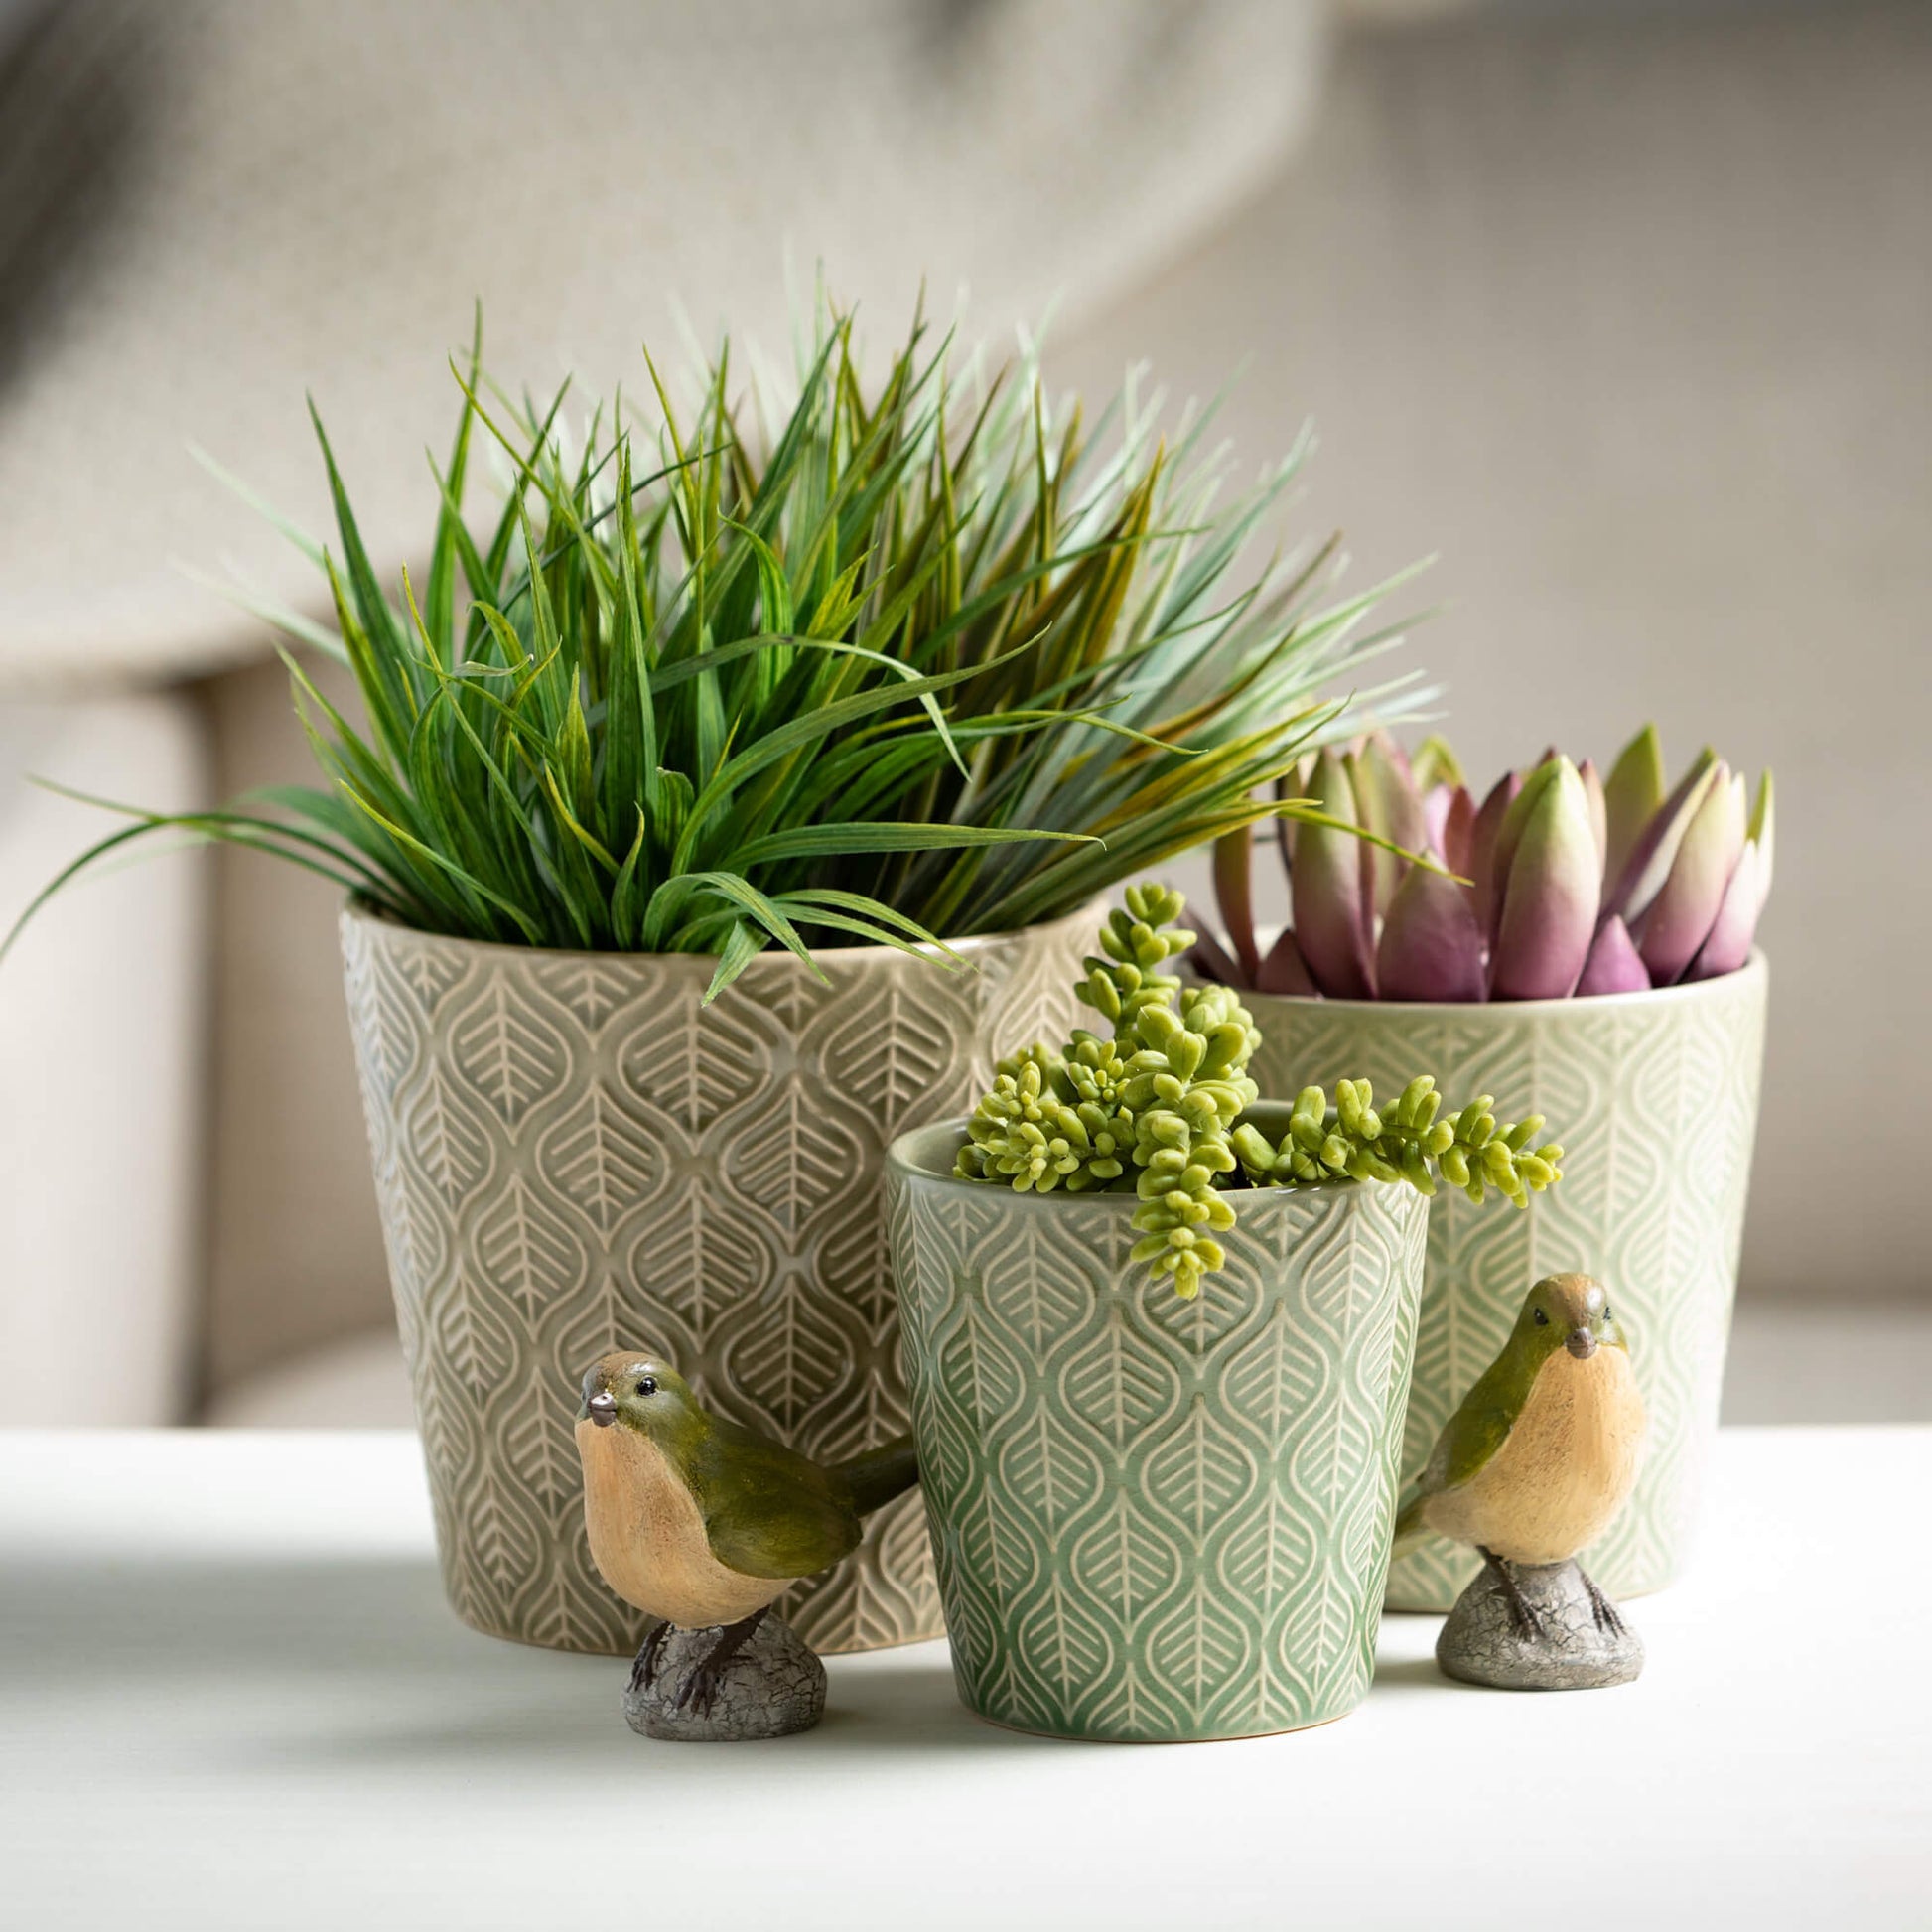 3 colors and sizes of textured planters filled with succulents and set on a table with little bird figurines.